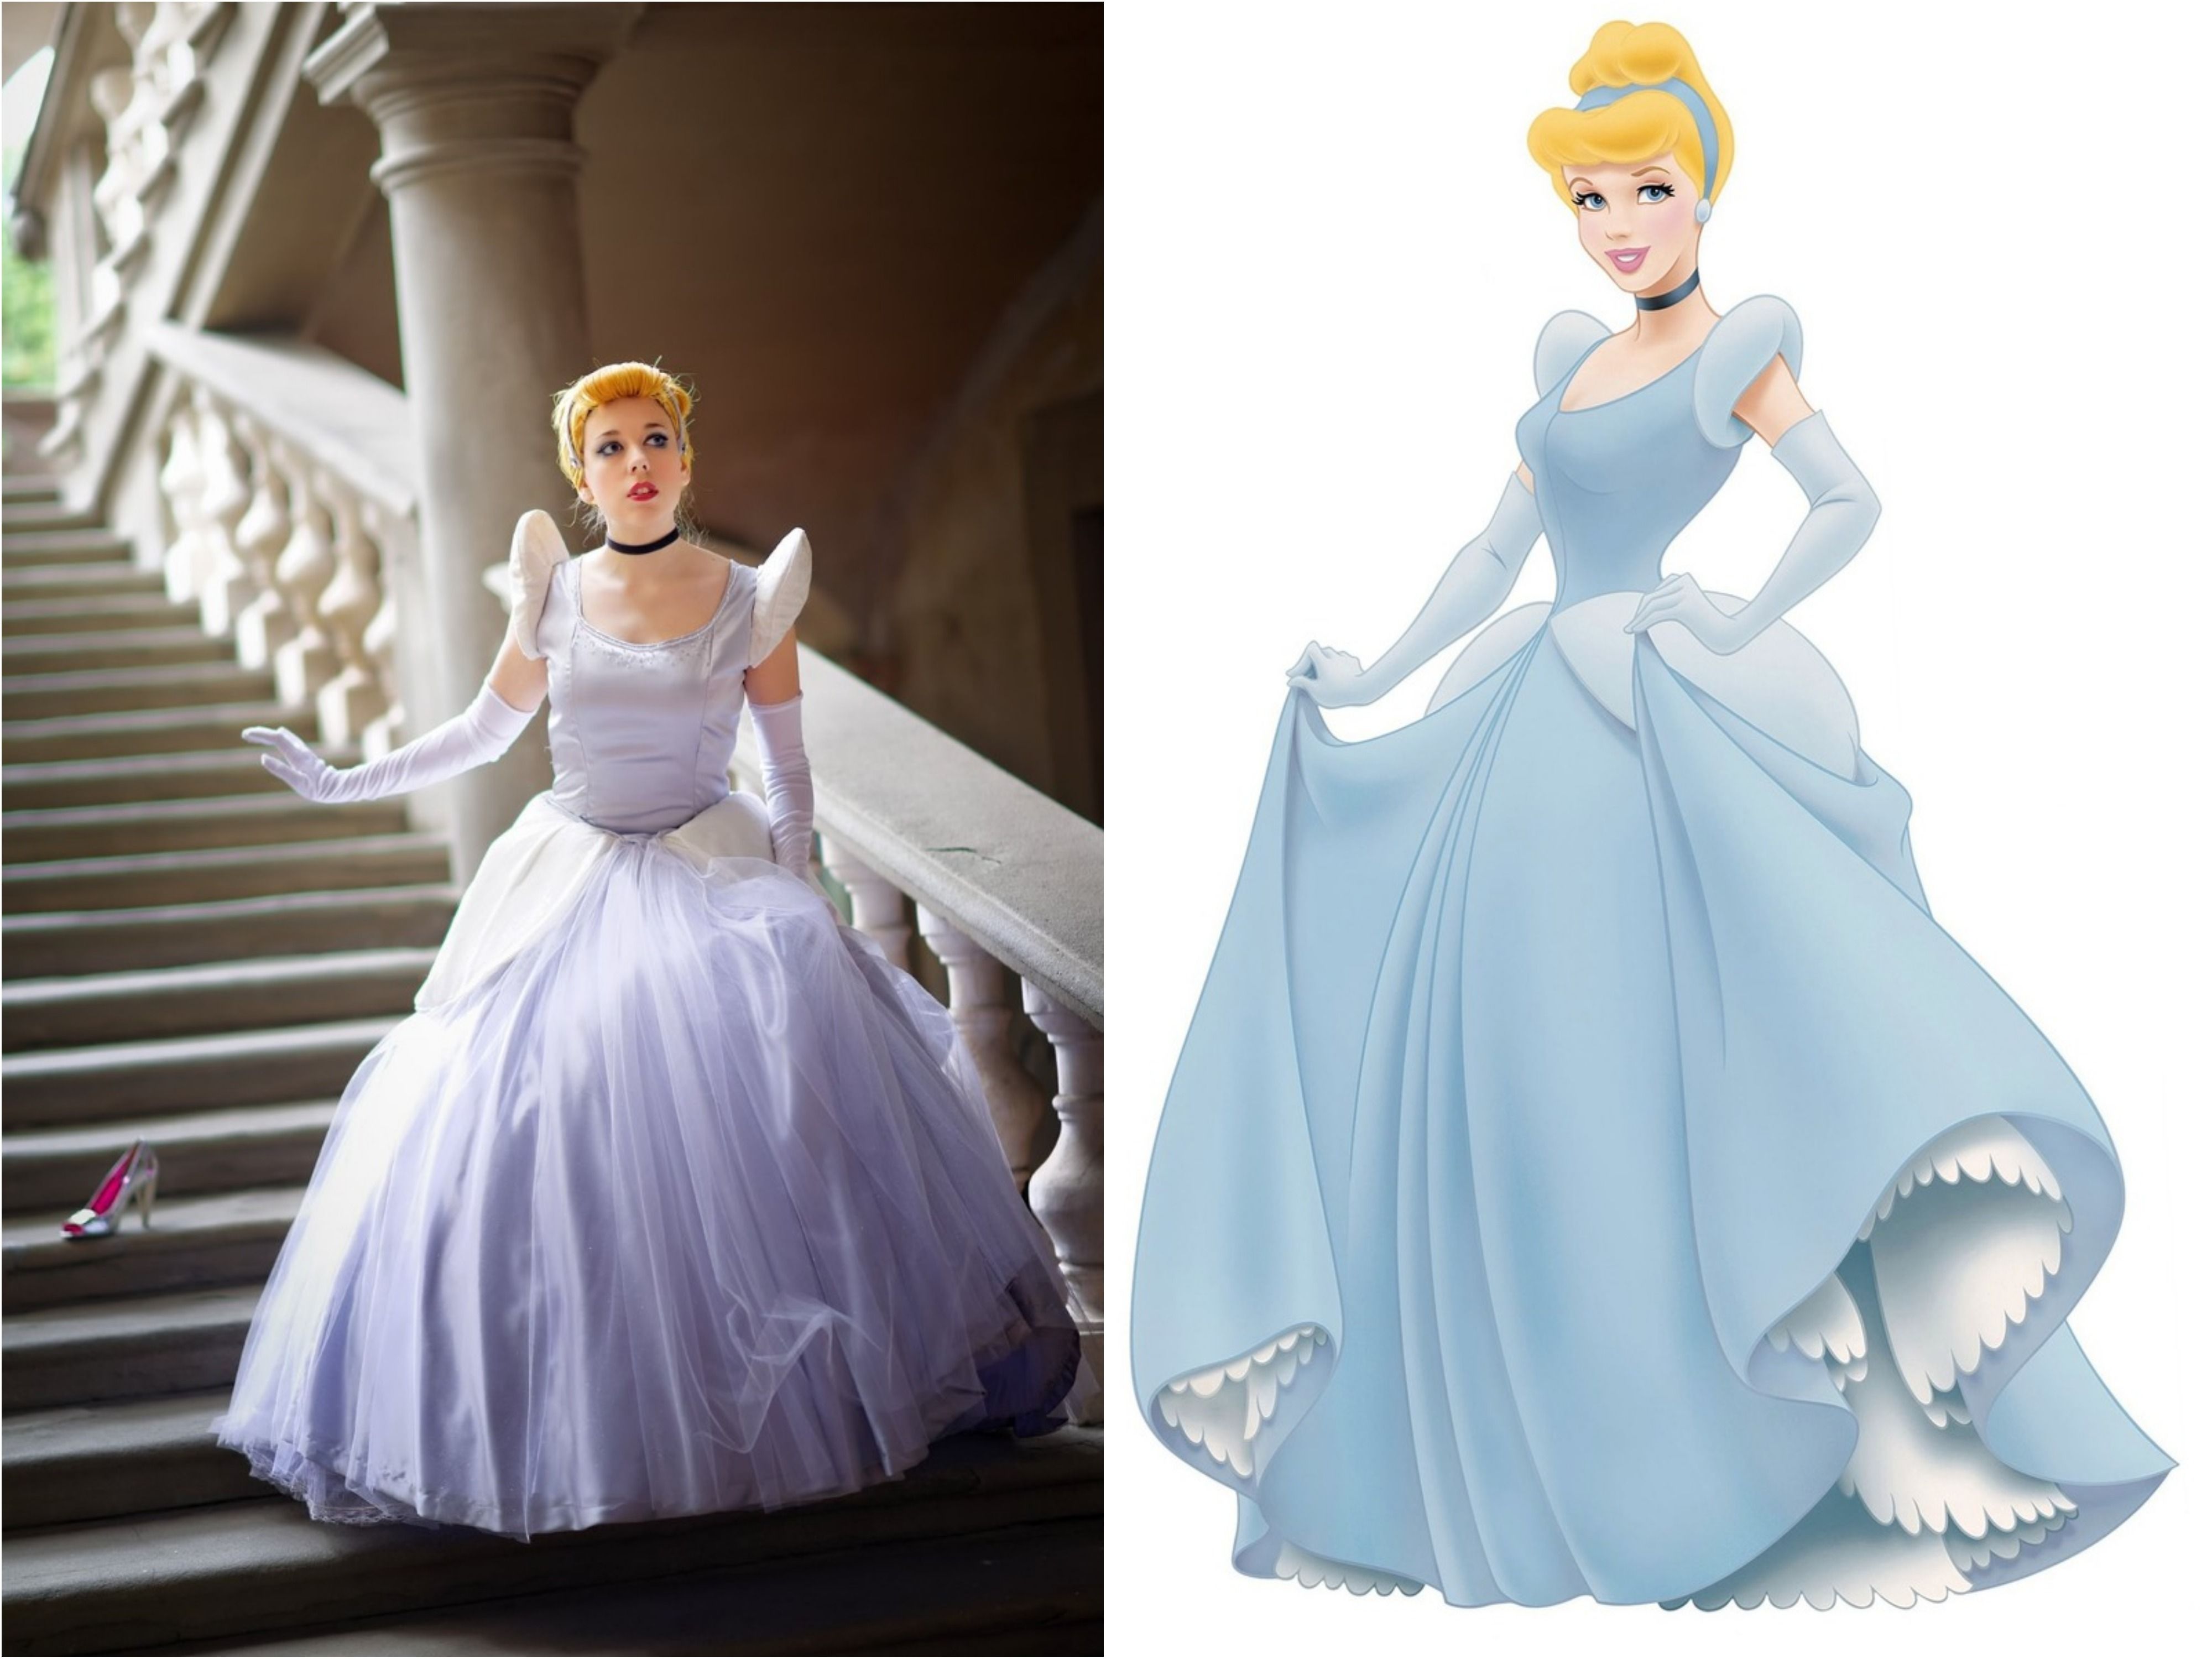 Cinderella beside character picture